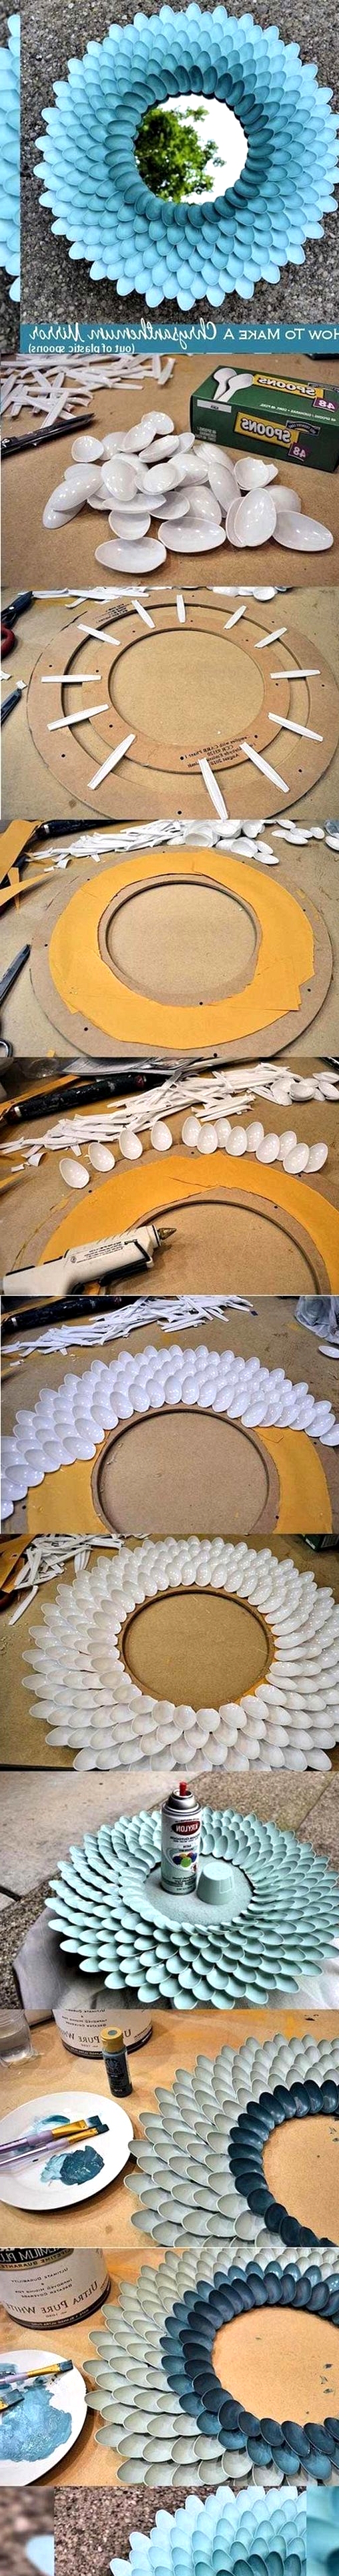 BUILD A CHRYSANTHEMUM MIRROR WITH PLASTIC SPOONS